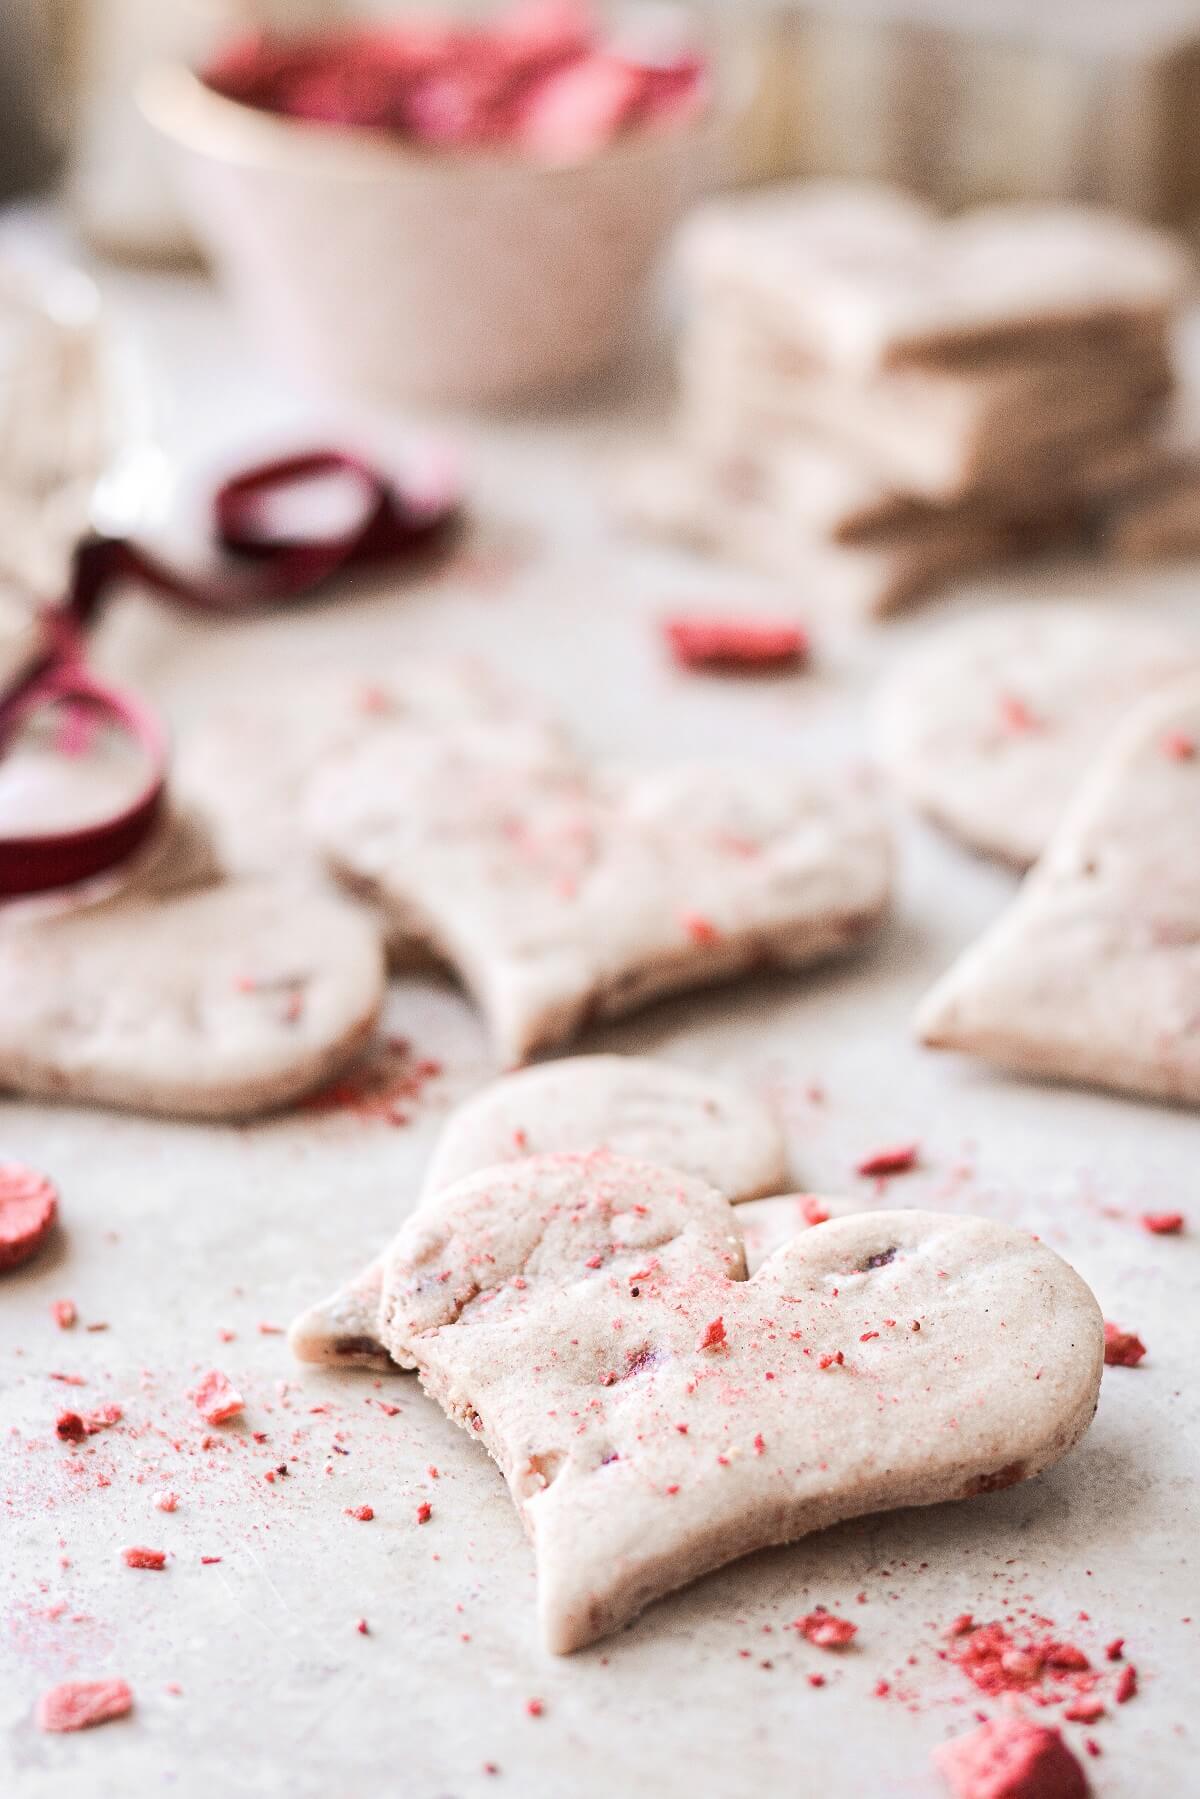 Crushed freeze dried strawberries sprinkled on top of heart shaped shortbread cookies.